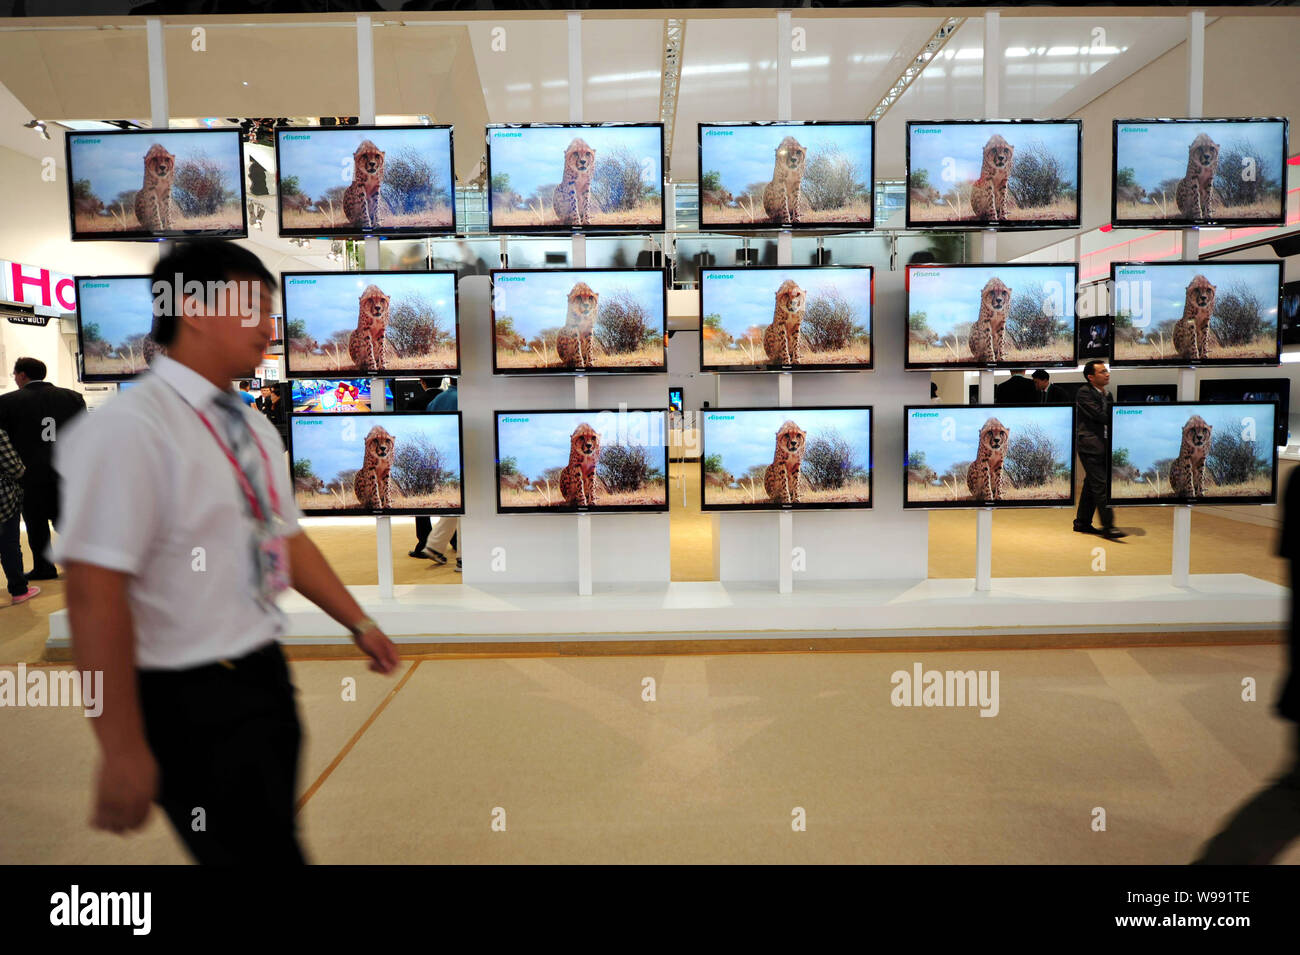 A visitor walks past a wall of Hisense flat-panel televisions during the 110th China Import and Export Fair, known as the Canton Fair, at the China Im Stock Photo